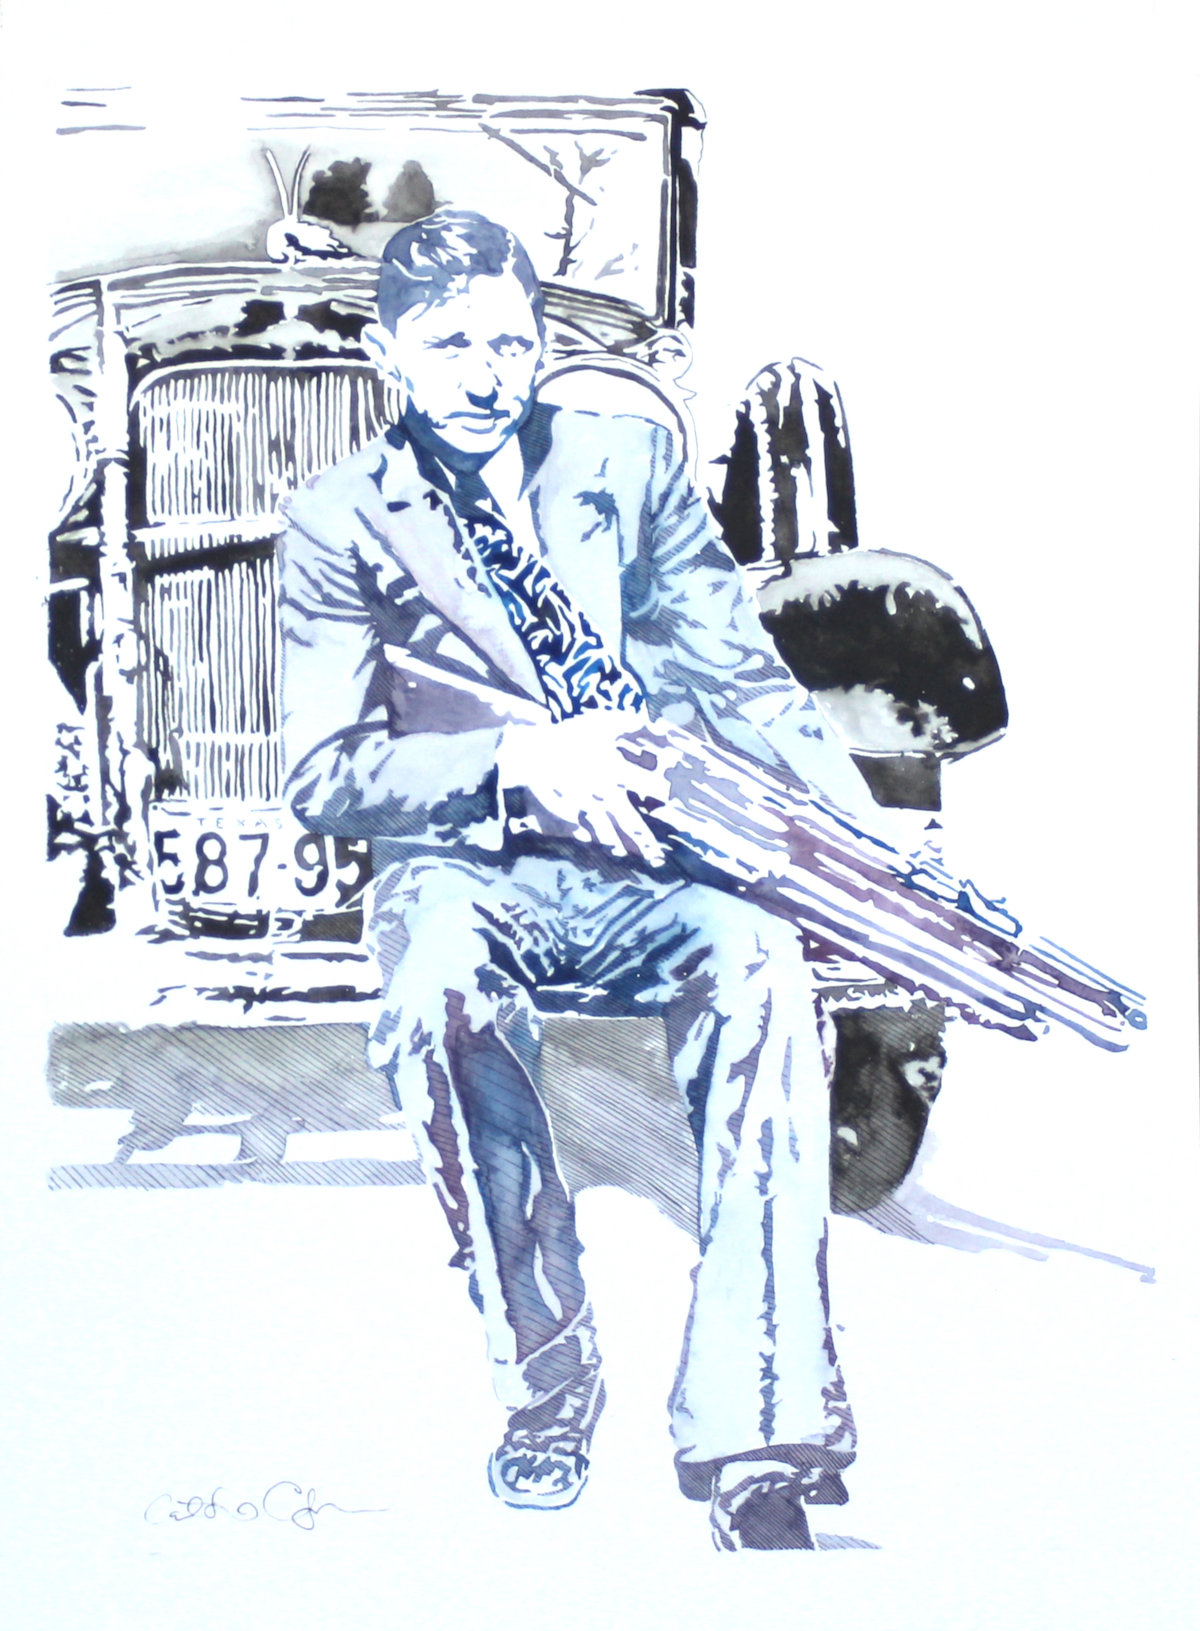 Watercolor painting of Clyde Barrow holding a gun and leaning against a car